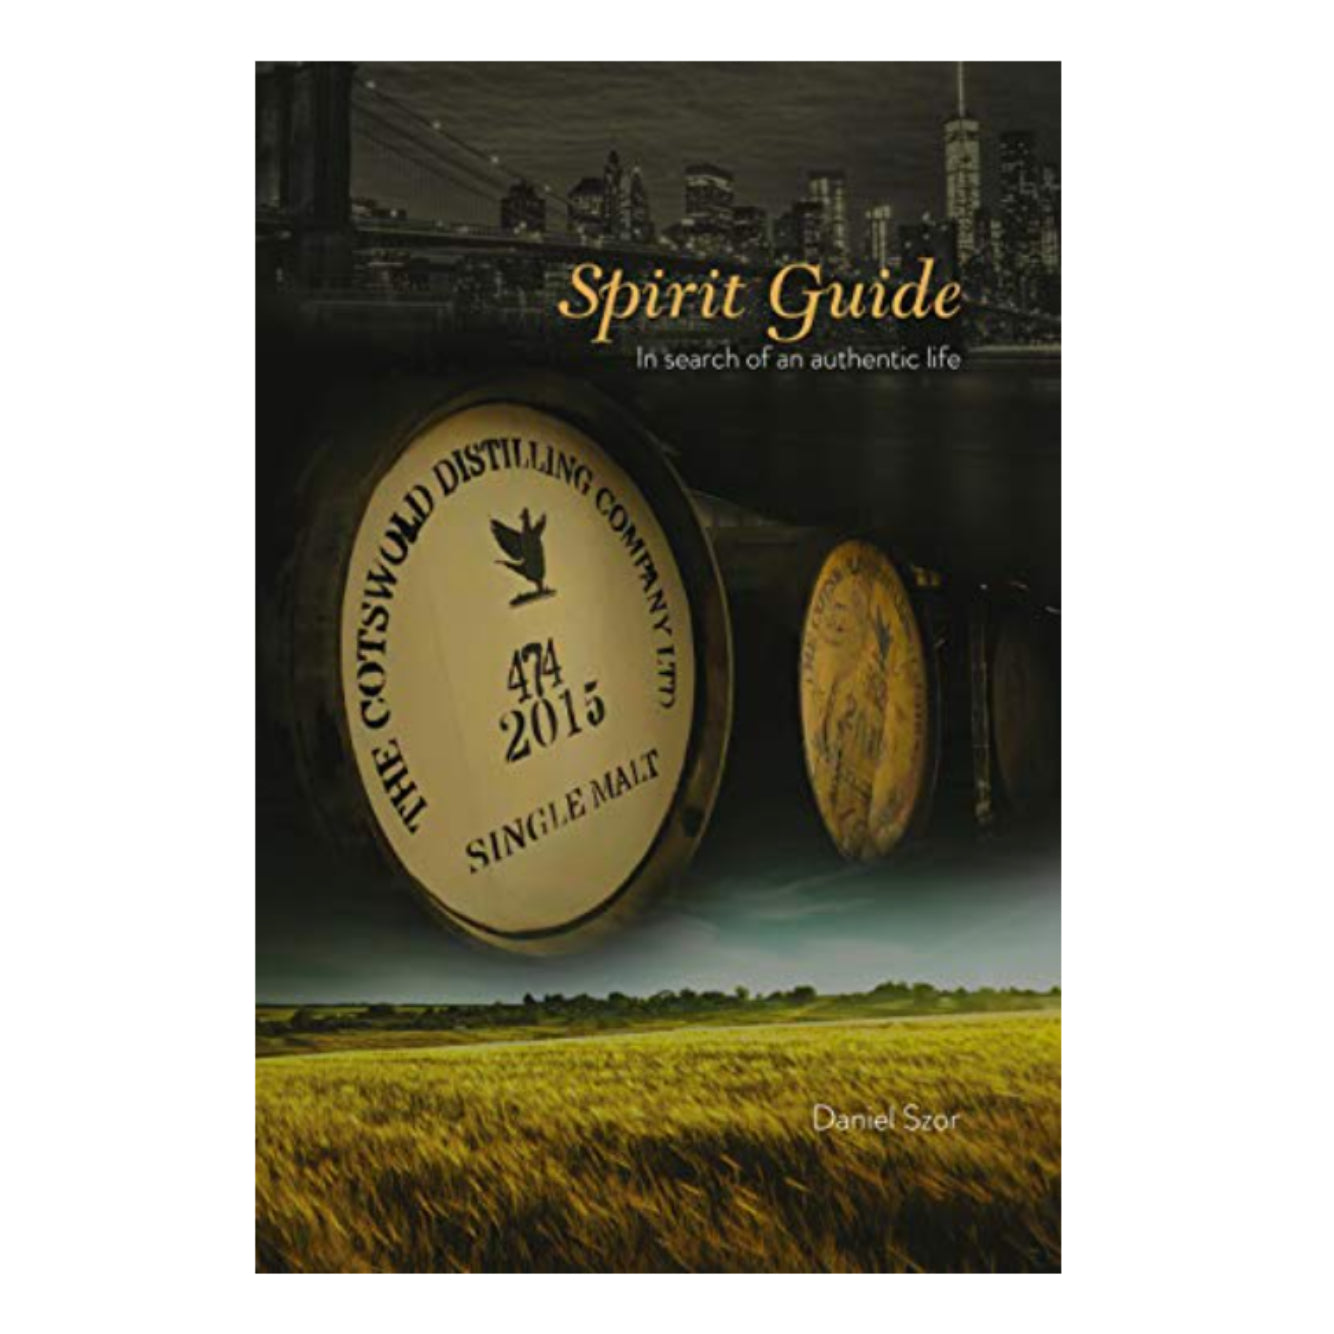 SPIRIT GUIDE: IN SEARCH OF AN AUTHENTIC LIFE